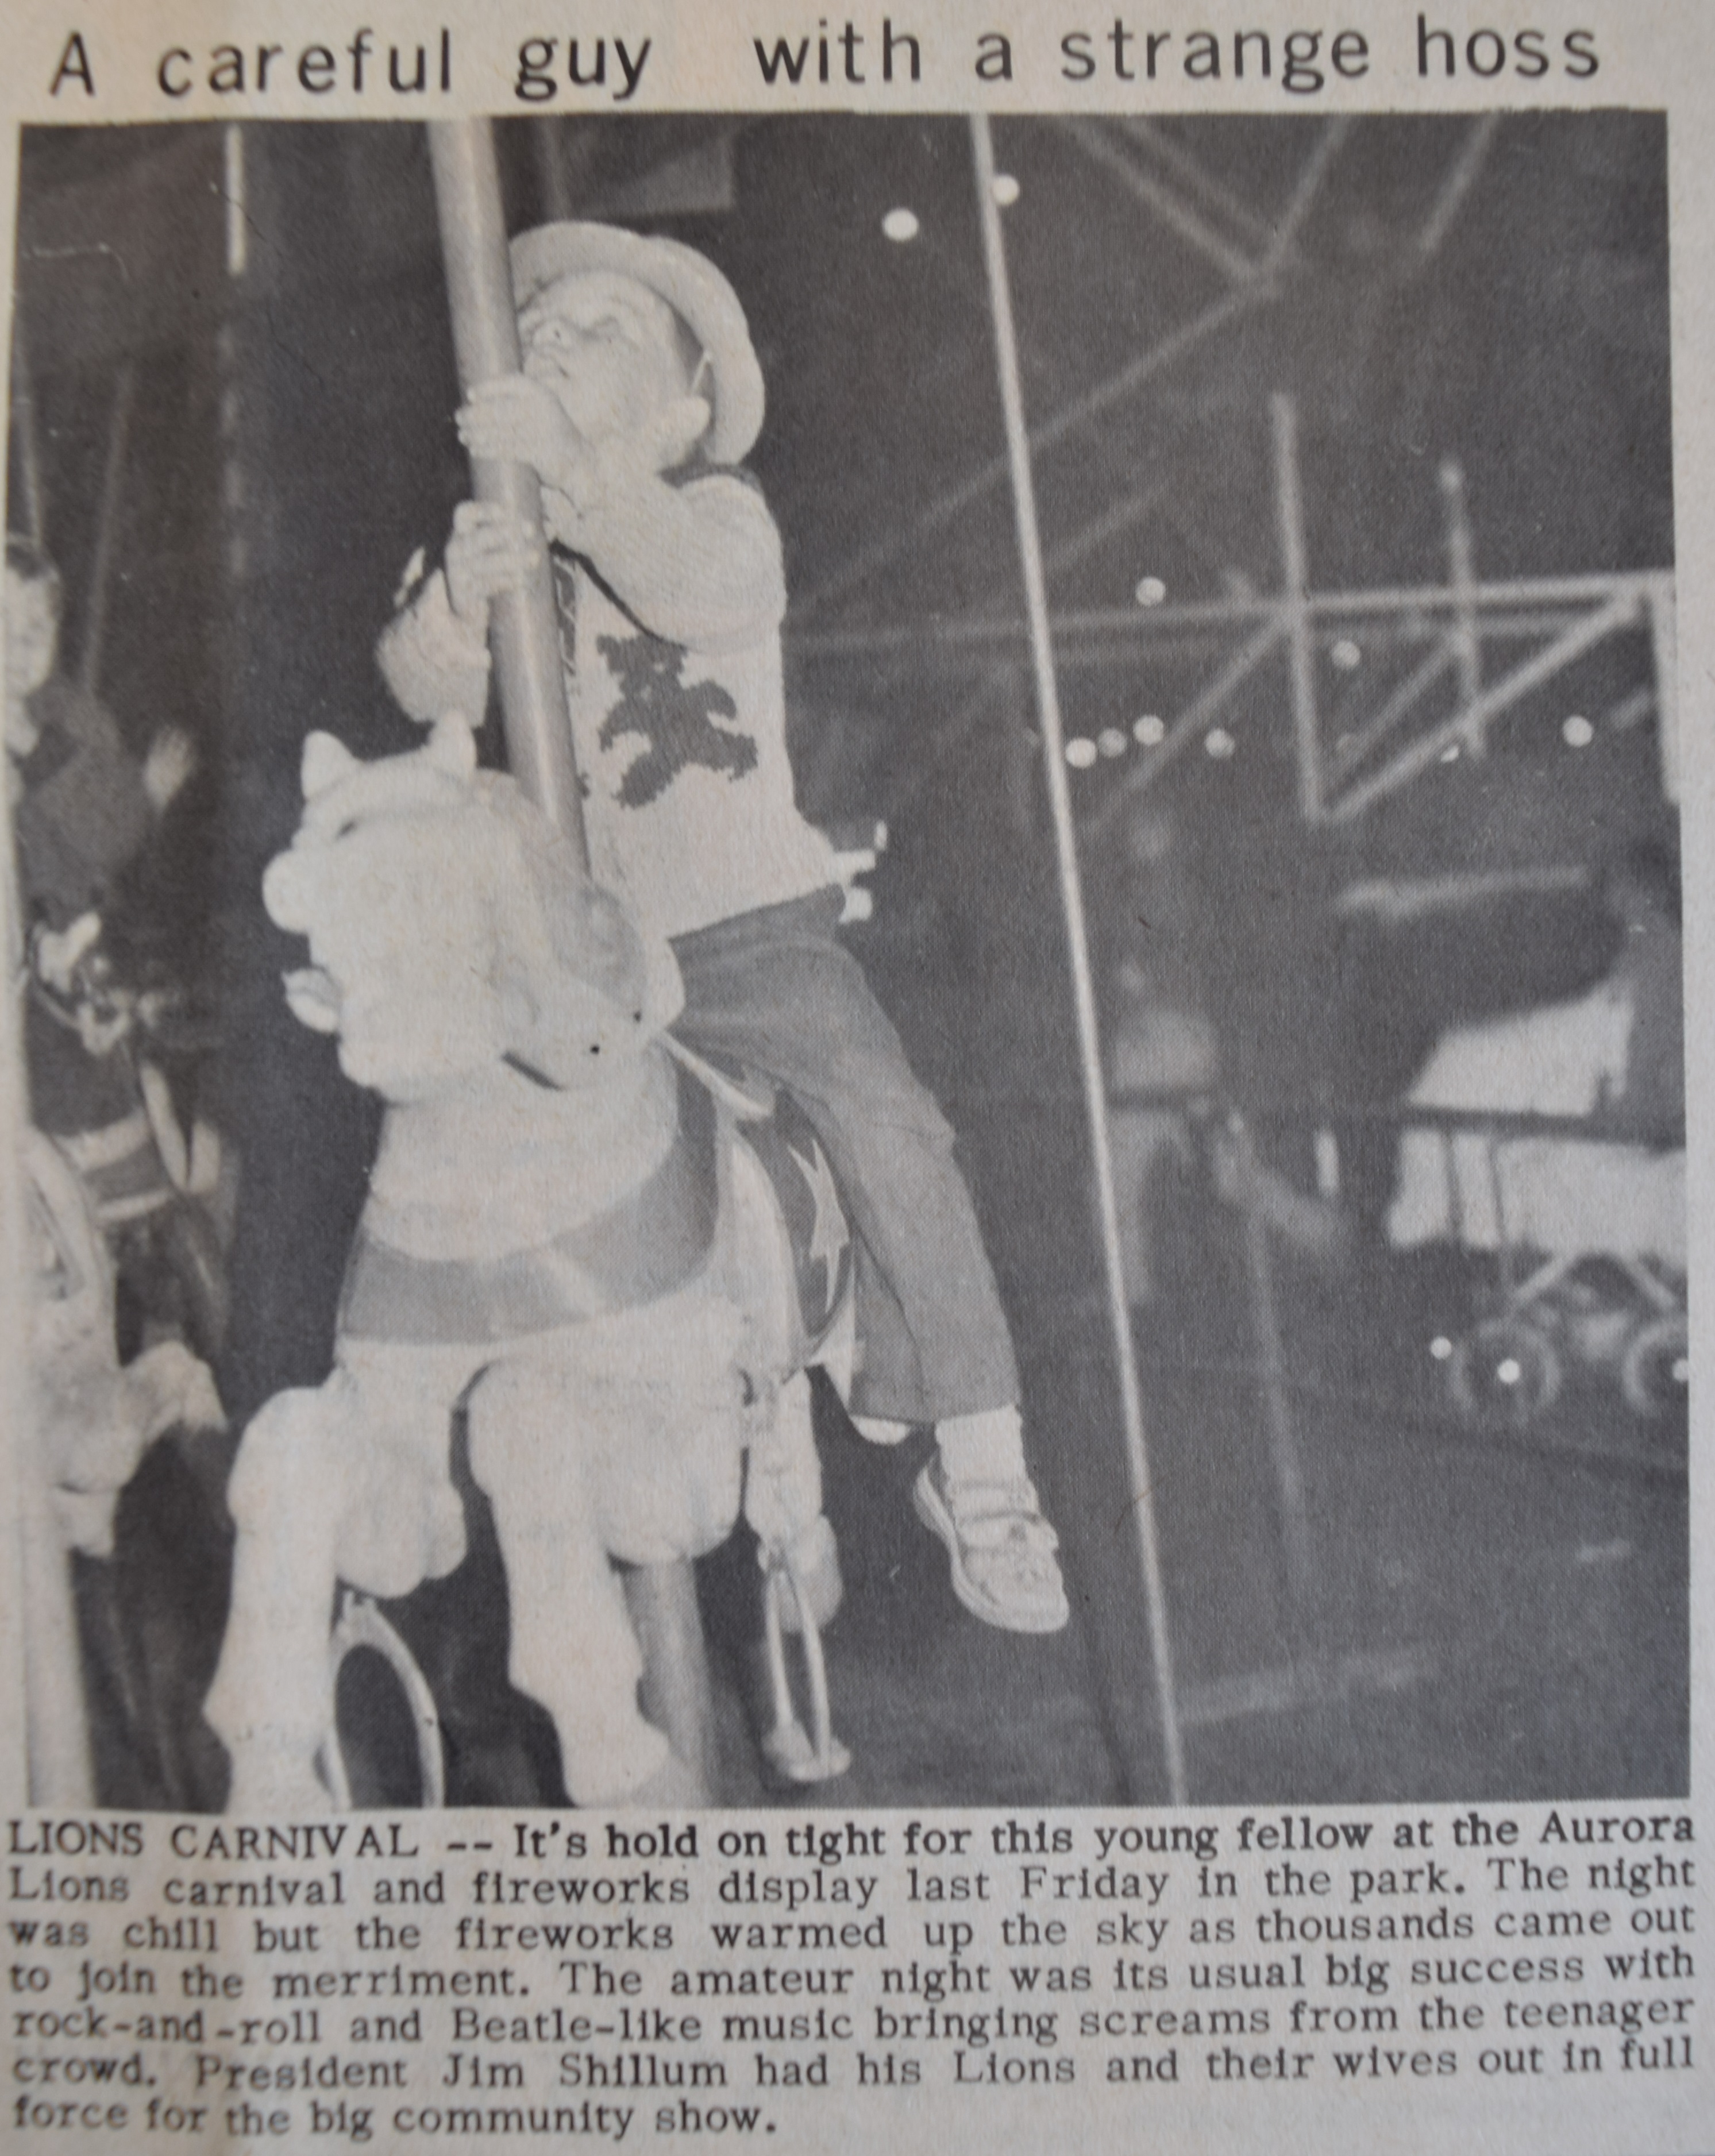 A black and white clipping from a newspaper depicting a photograph of a small boy on a merry-go-round horse; the young boy wears a hat and is looking up; a baby carriage, people and a ferris wheel are visible in the background.